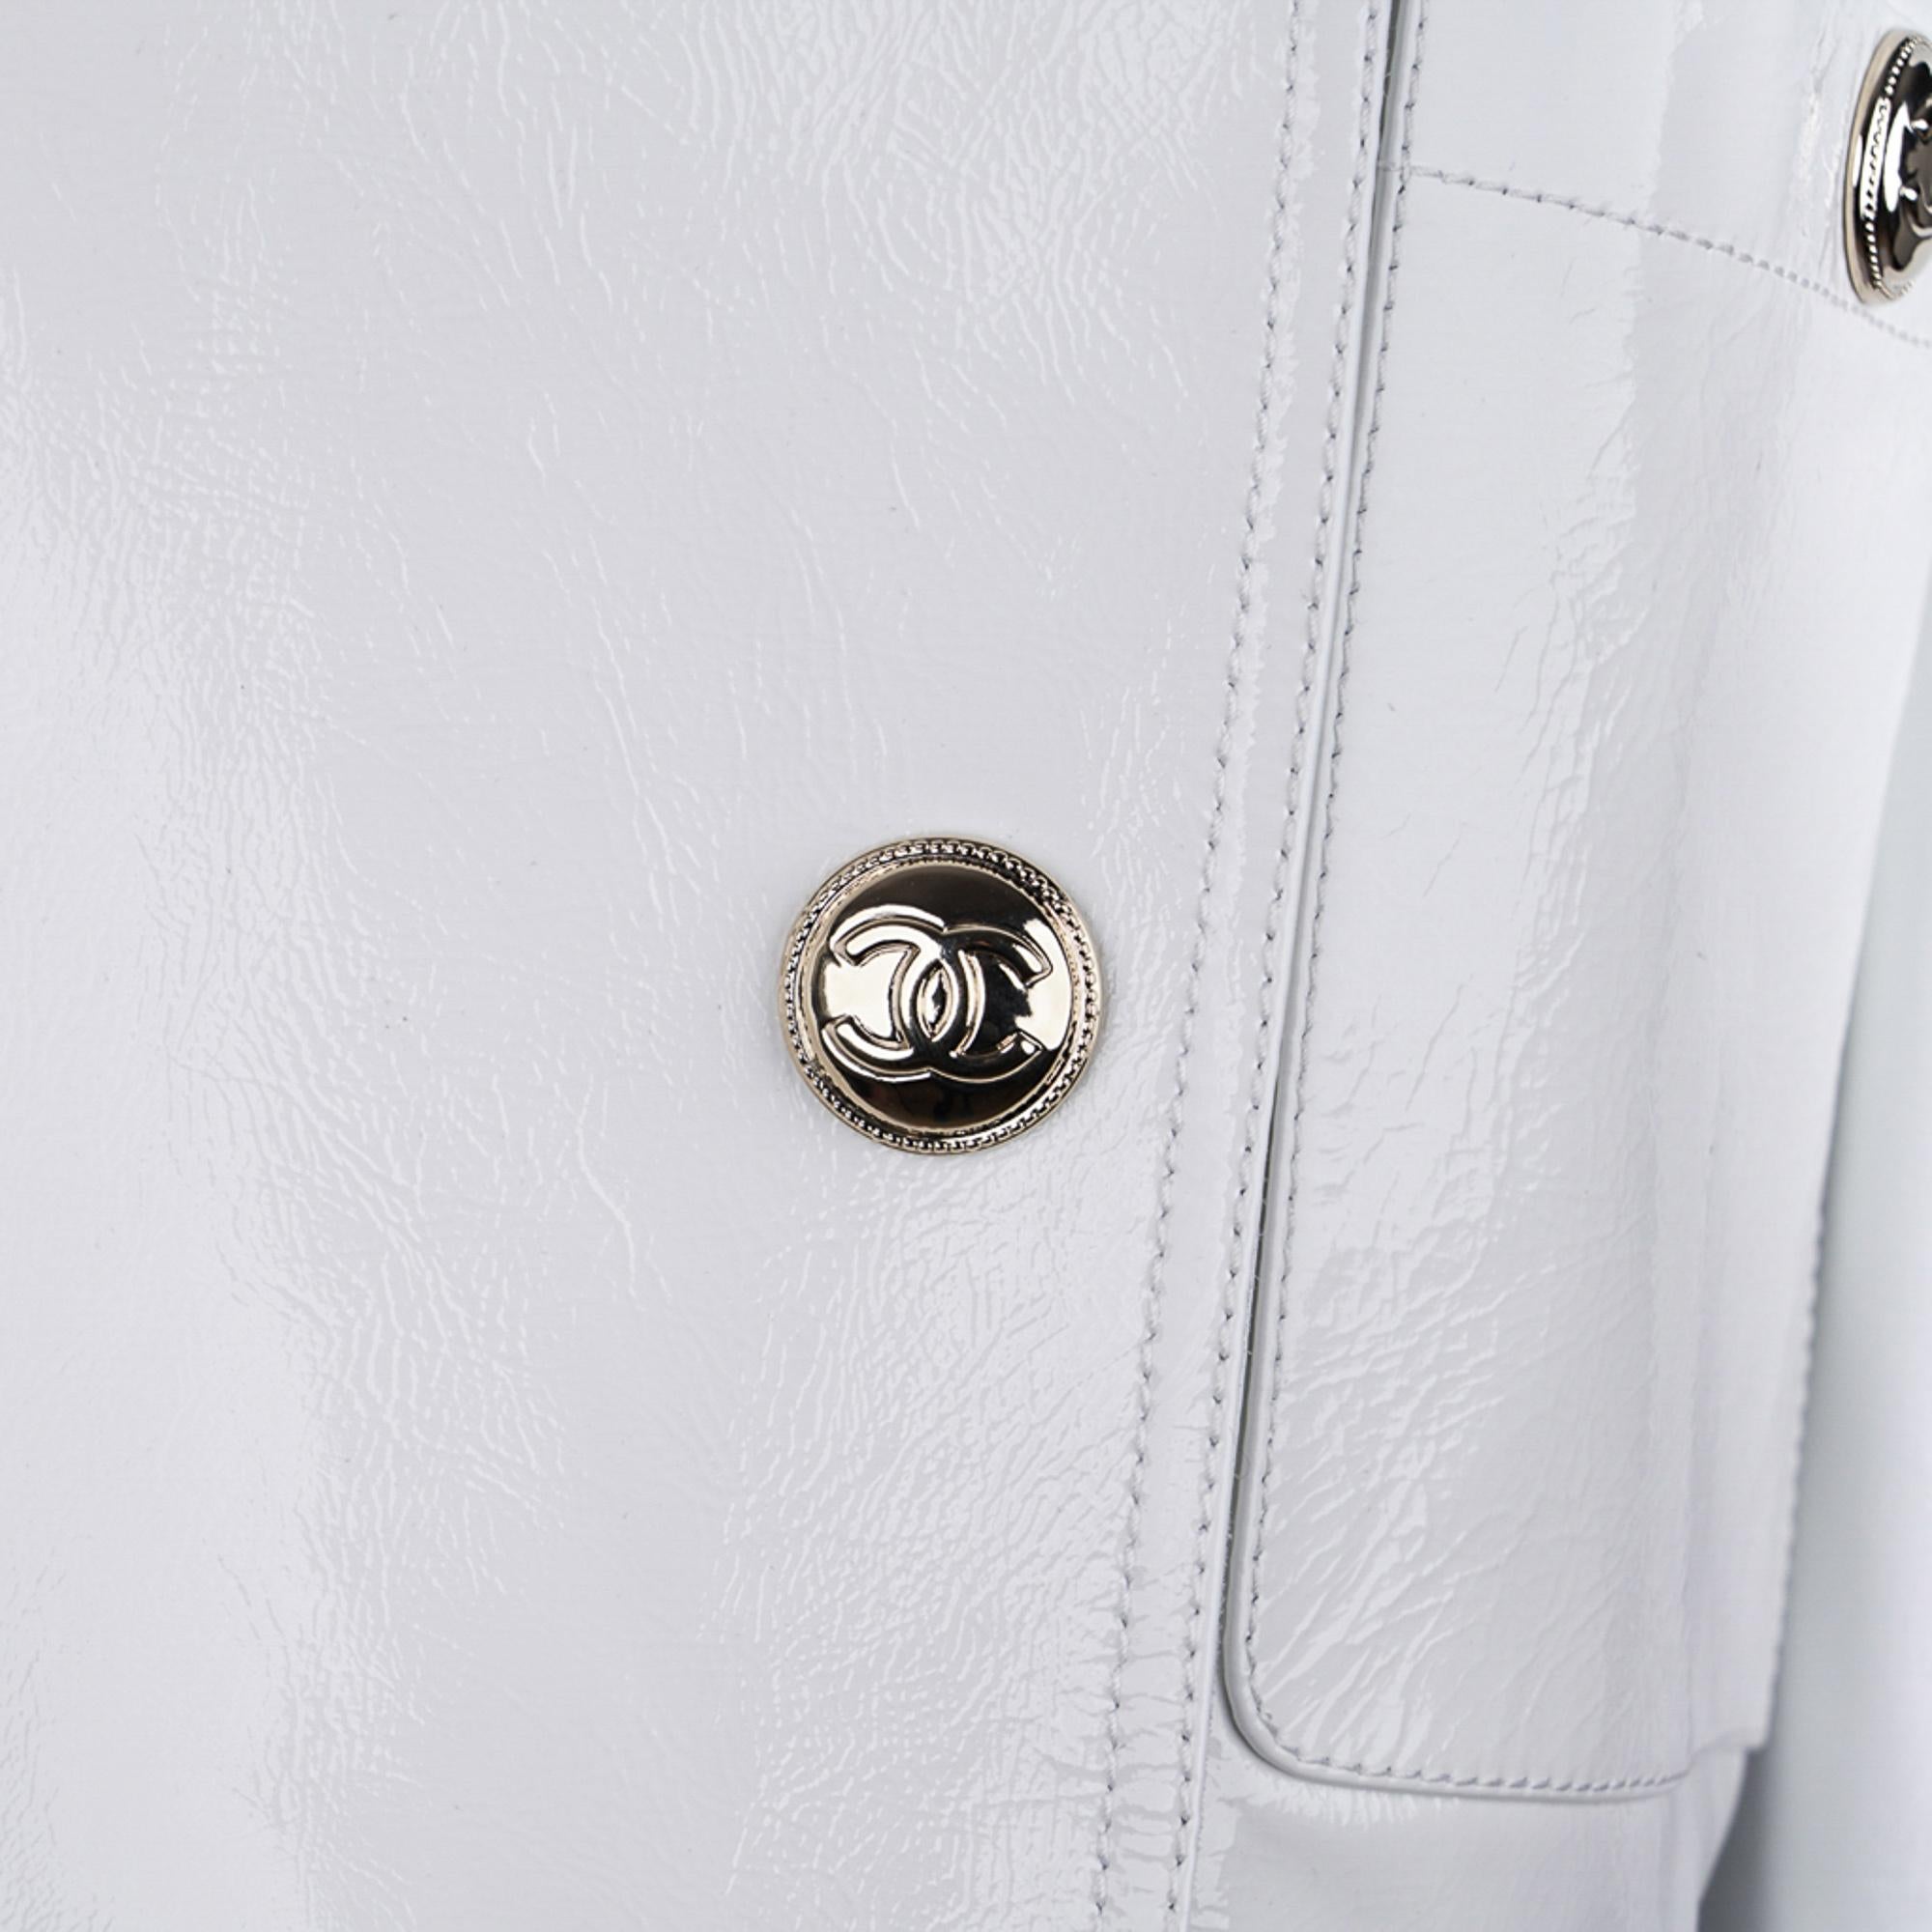 Mightychic offers a rare Chanel 2020-21FW White patent leather jacket.
Absolutely fabulous!
Short biker waist length jacket with stand up collar.
Bold silver hardware with CC center.
4 Silver asymmetrical CC snap buttons.
2 Patch breast pockets with